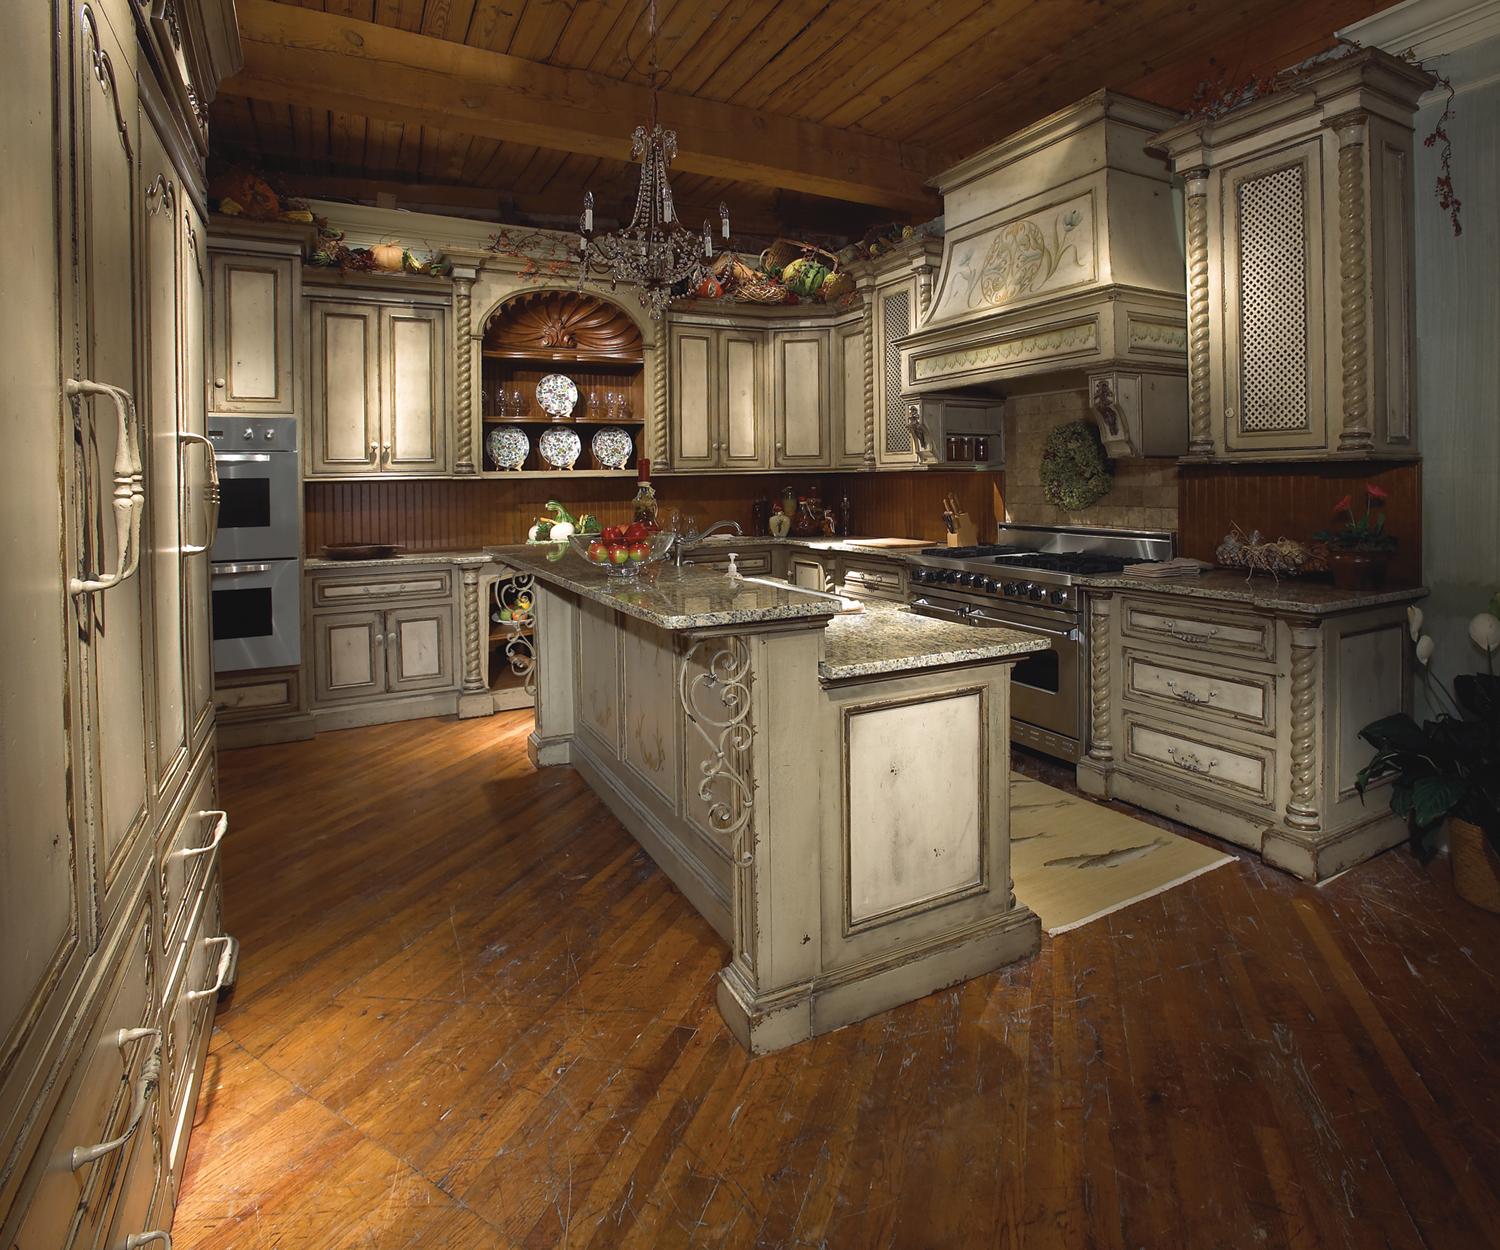 Alluring Tuscan Kitchen Design Ideas with a Warm Traditional Feel